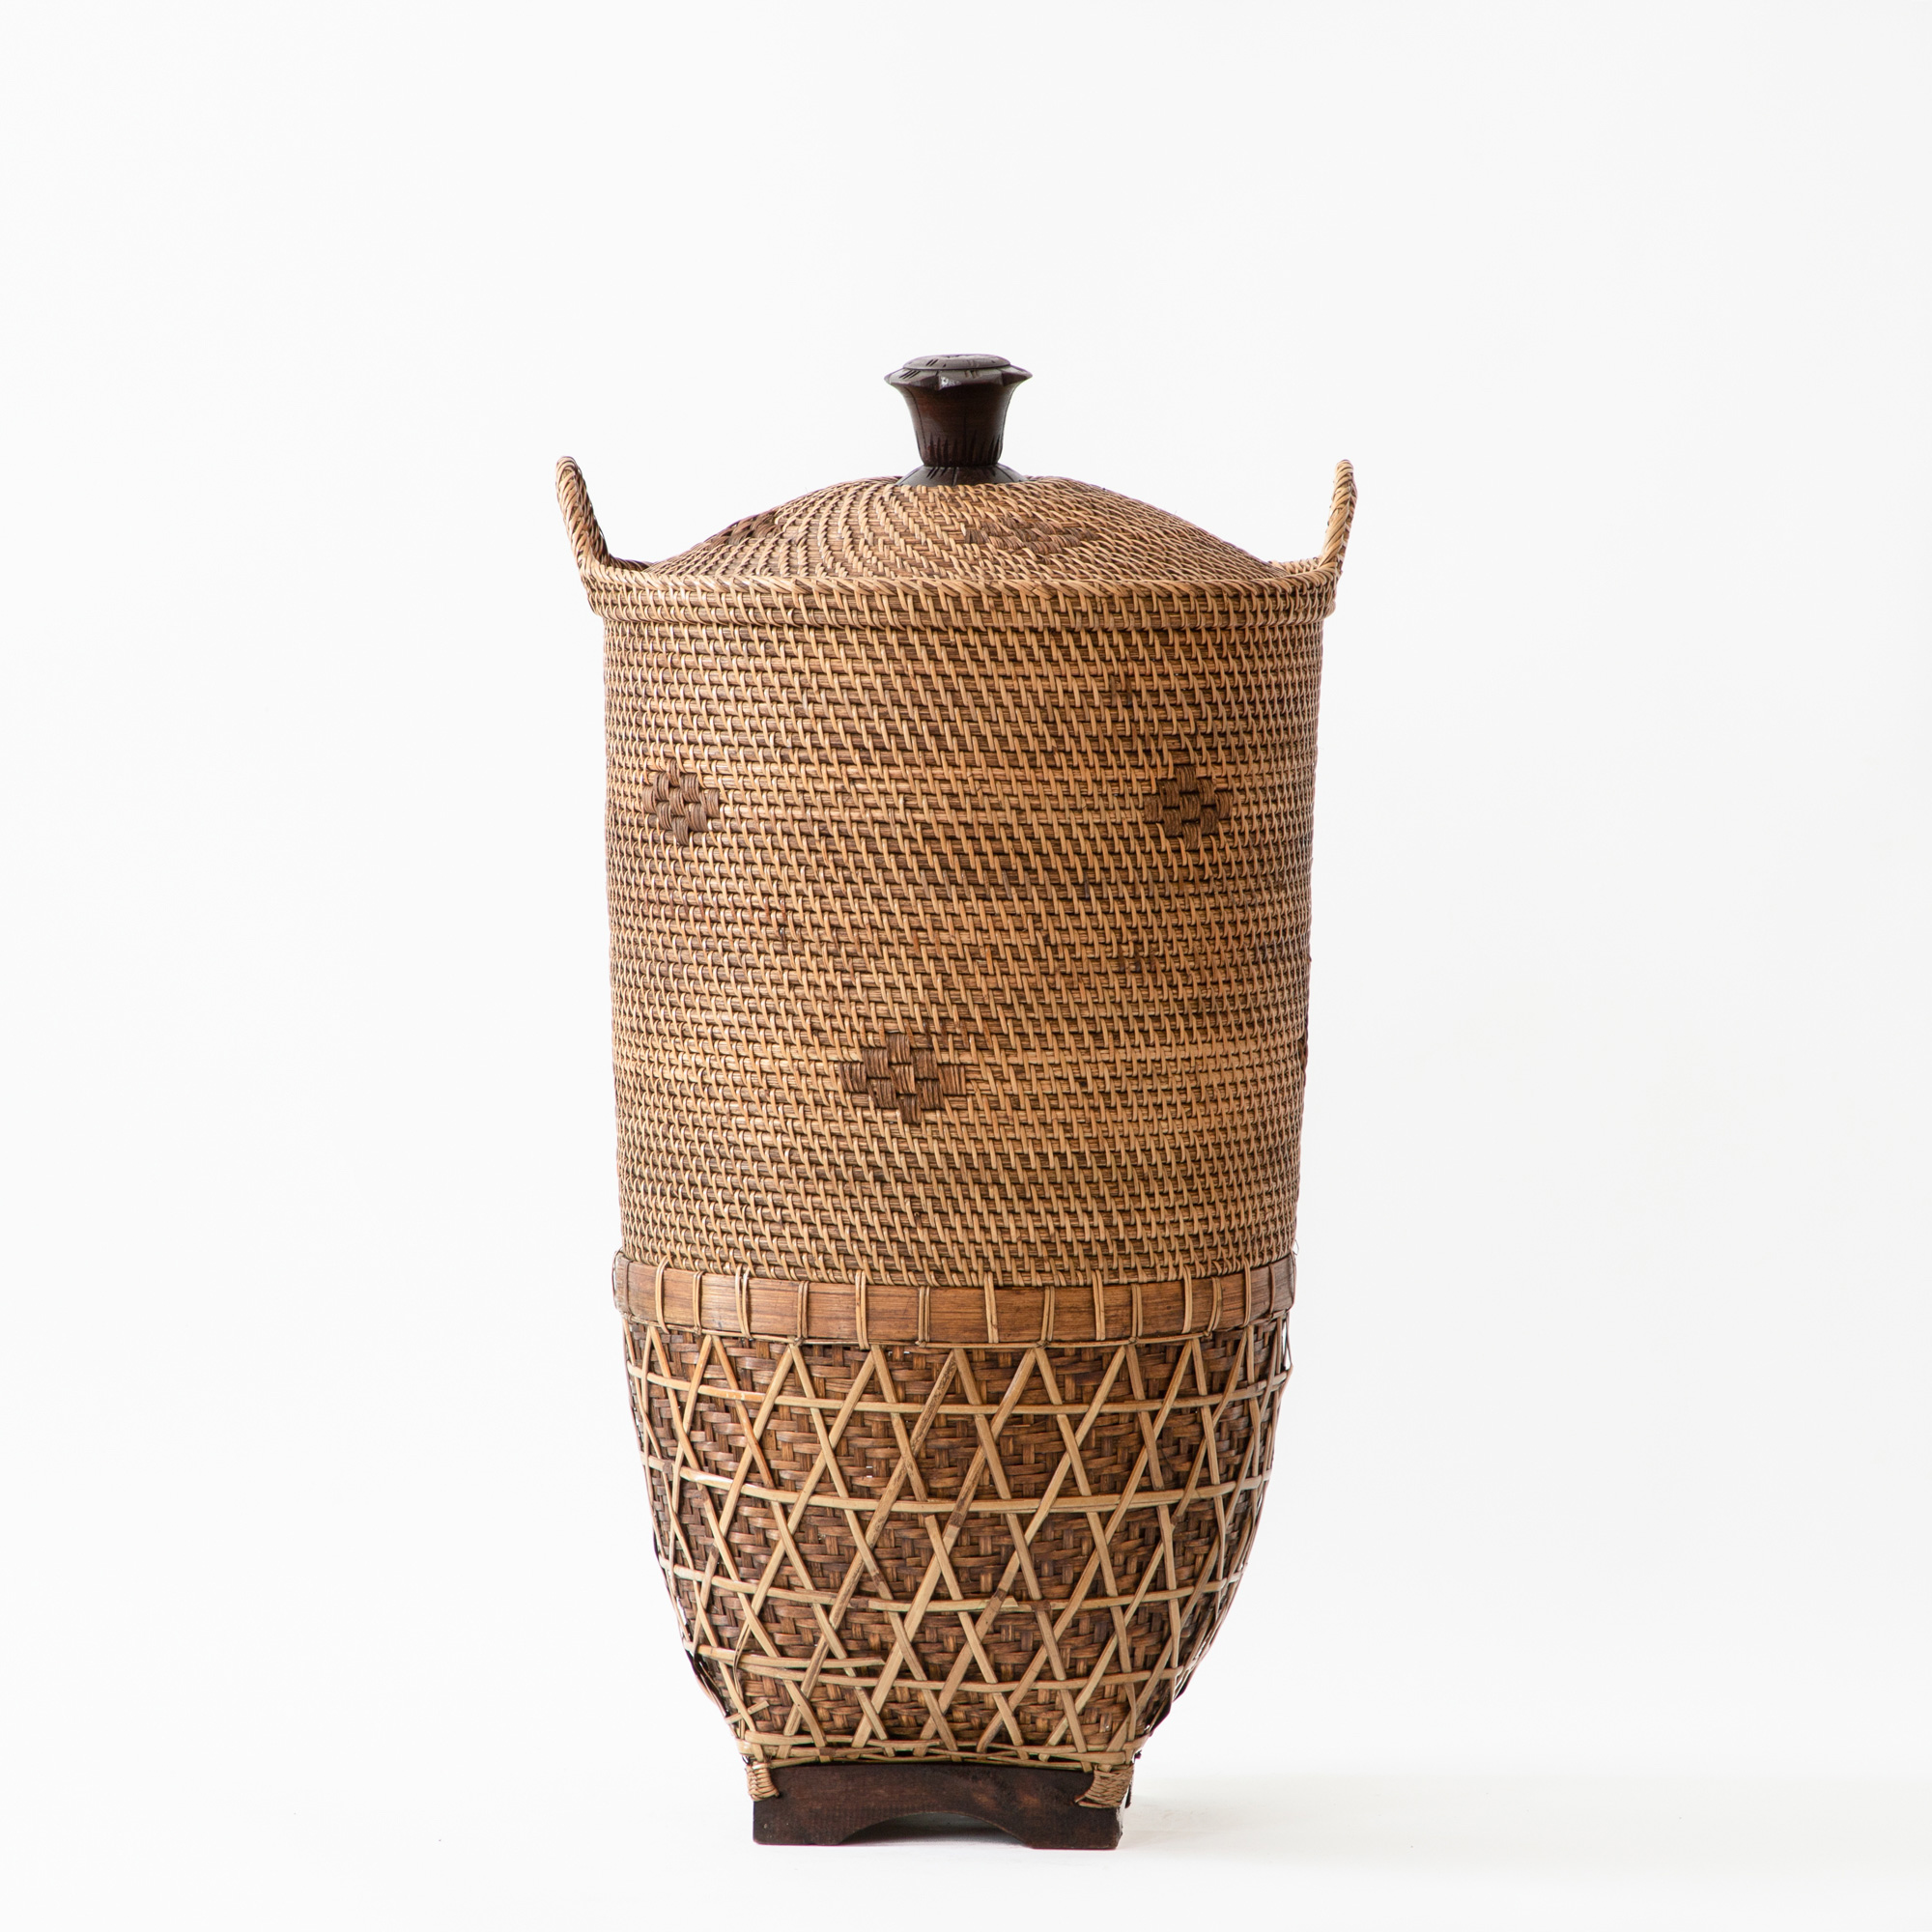 Buana Handwoven Basket With Lid and Side Swing Handles